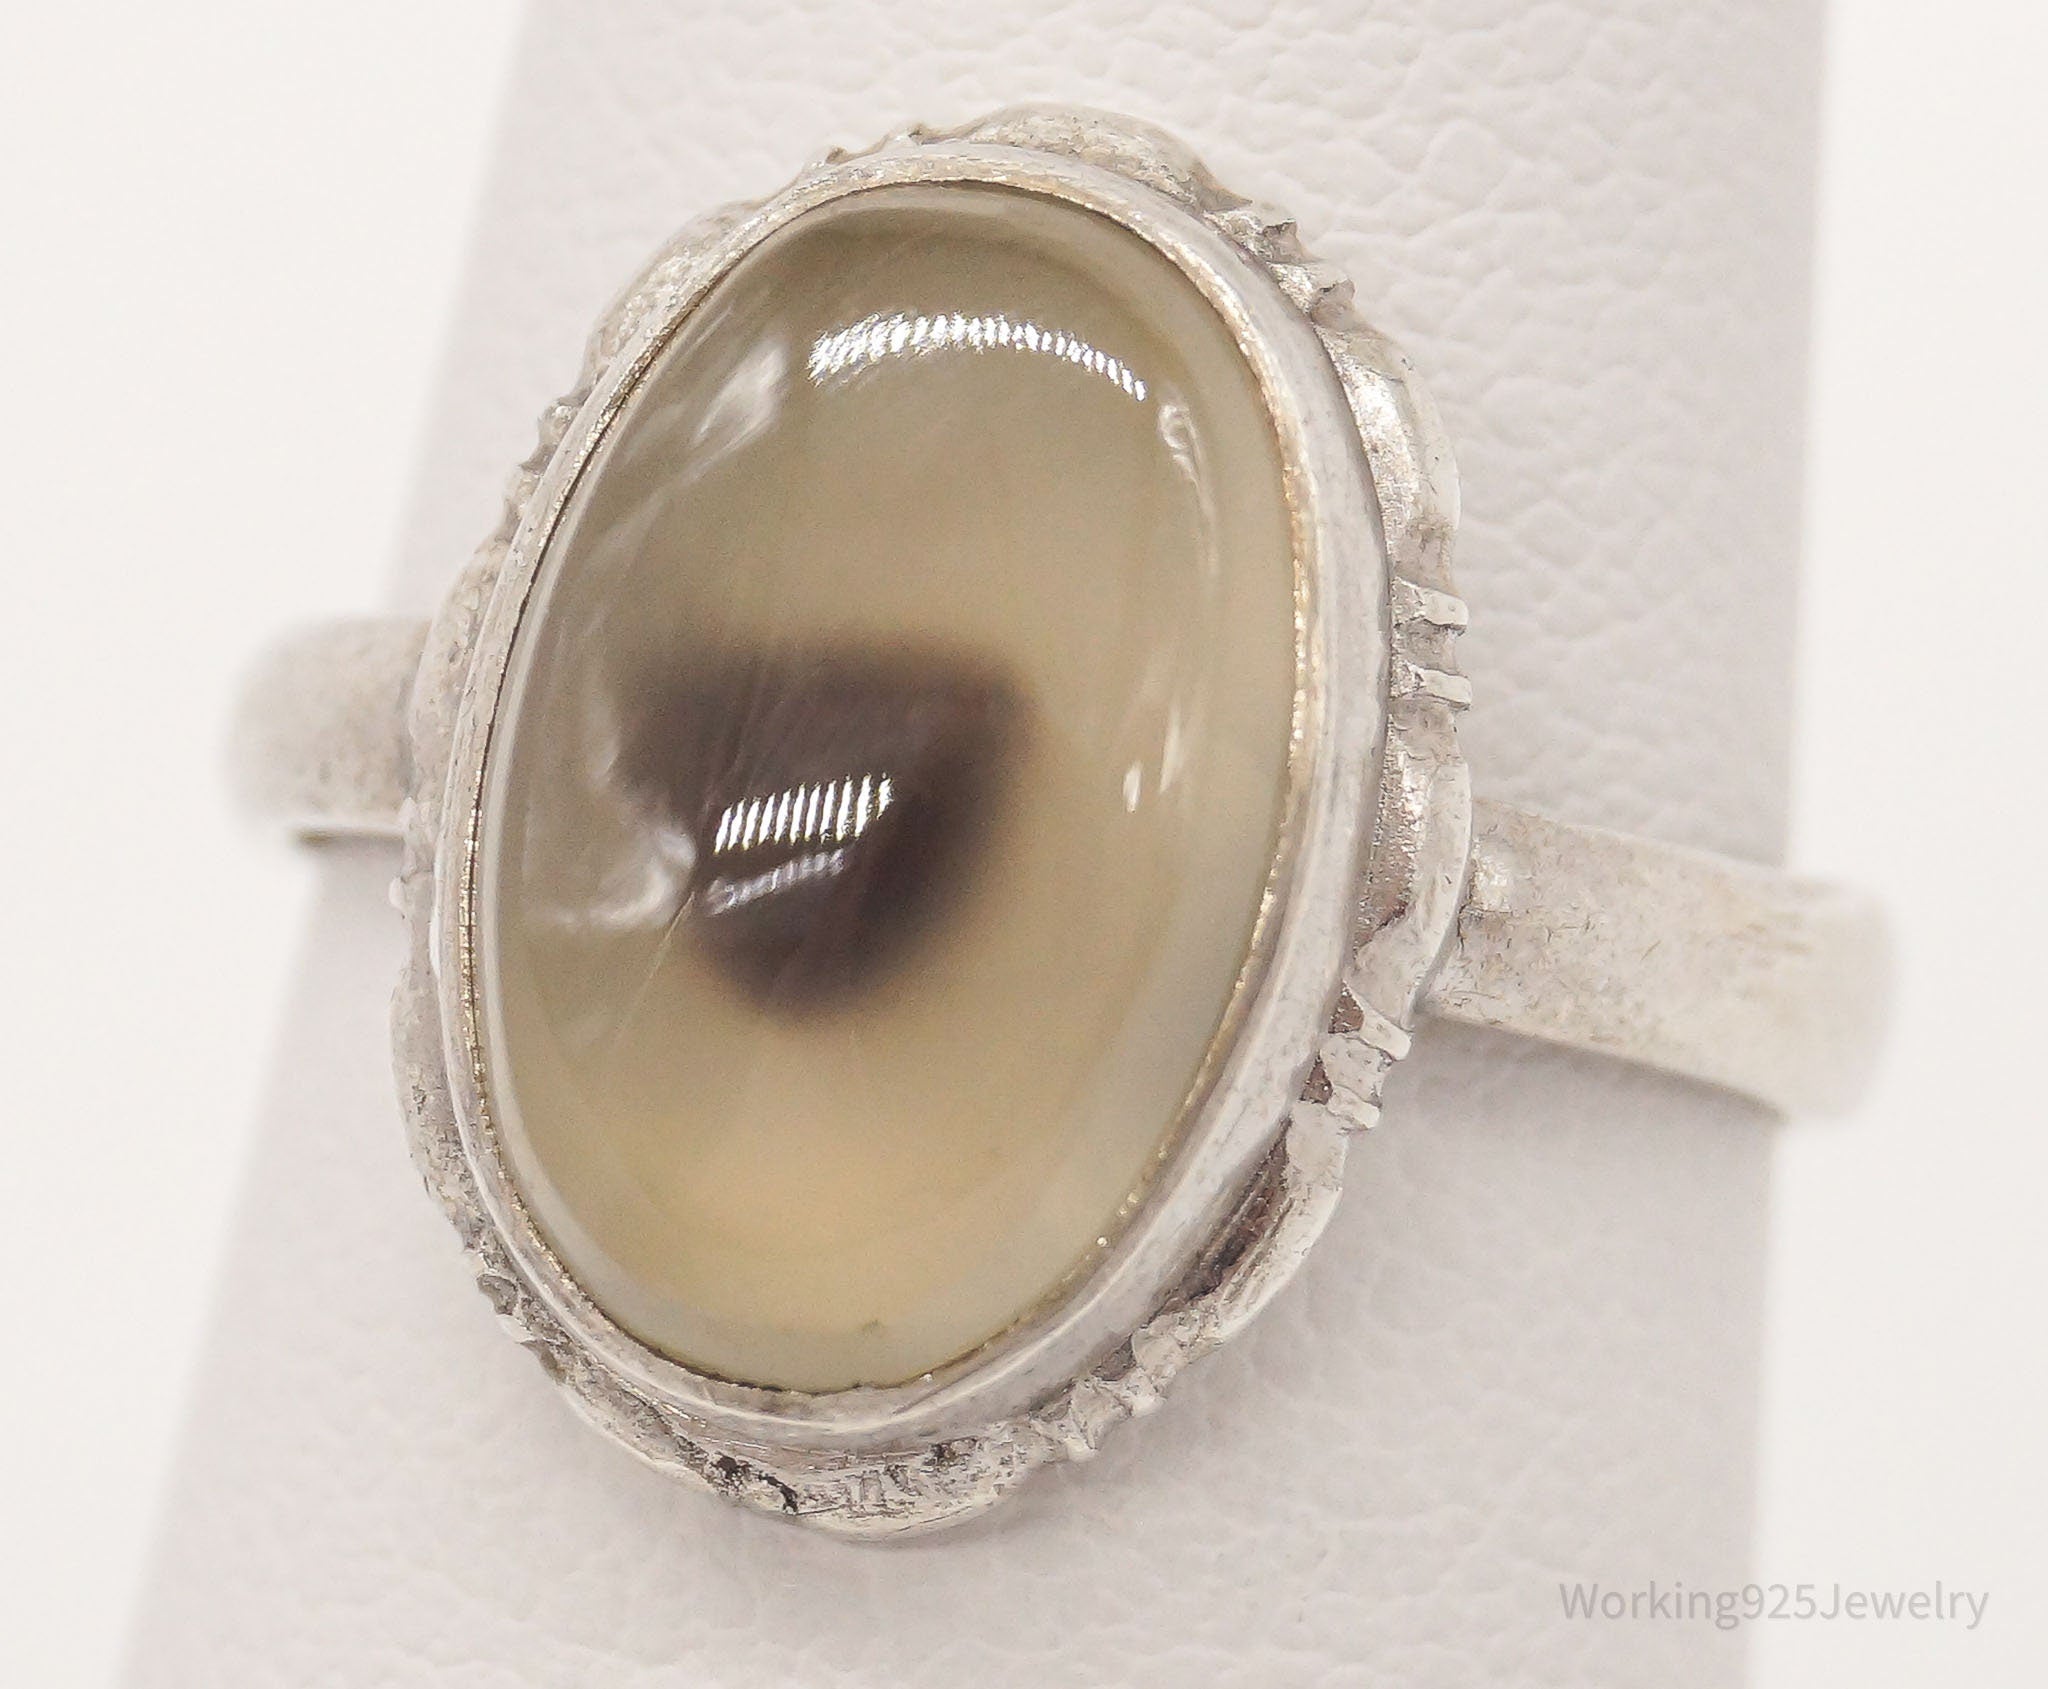 Antique Agate Sterling Silver Ring Size 5.75